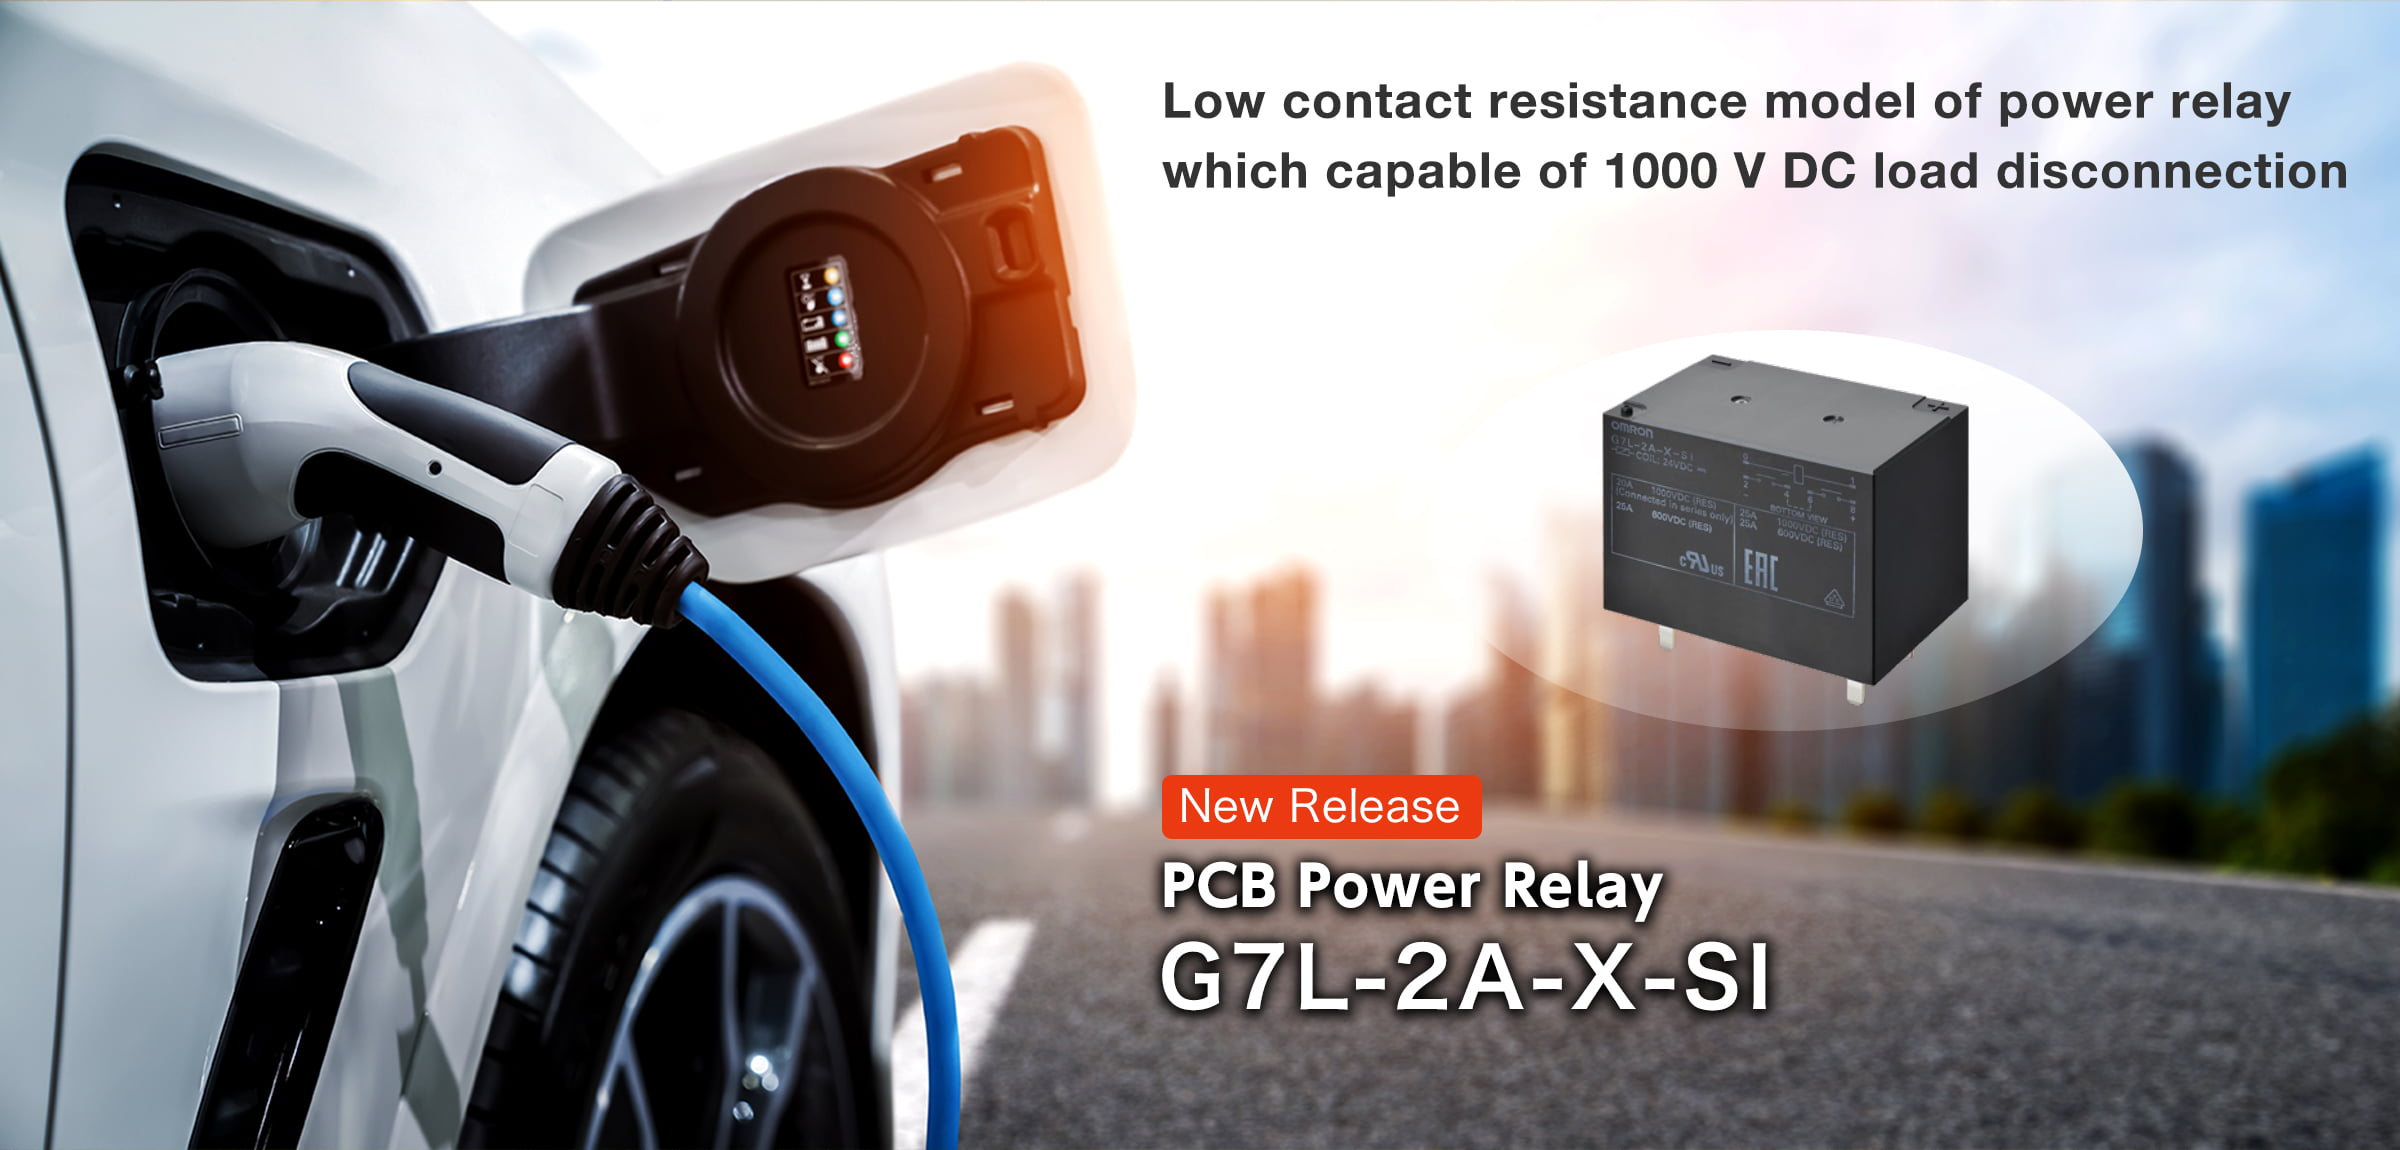 Low contact resistance model of power relay which capable of 1000 V DC load disconnection, G7L-2A-X-SI